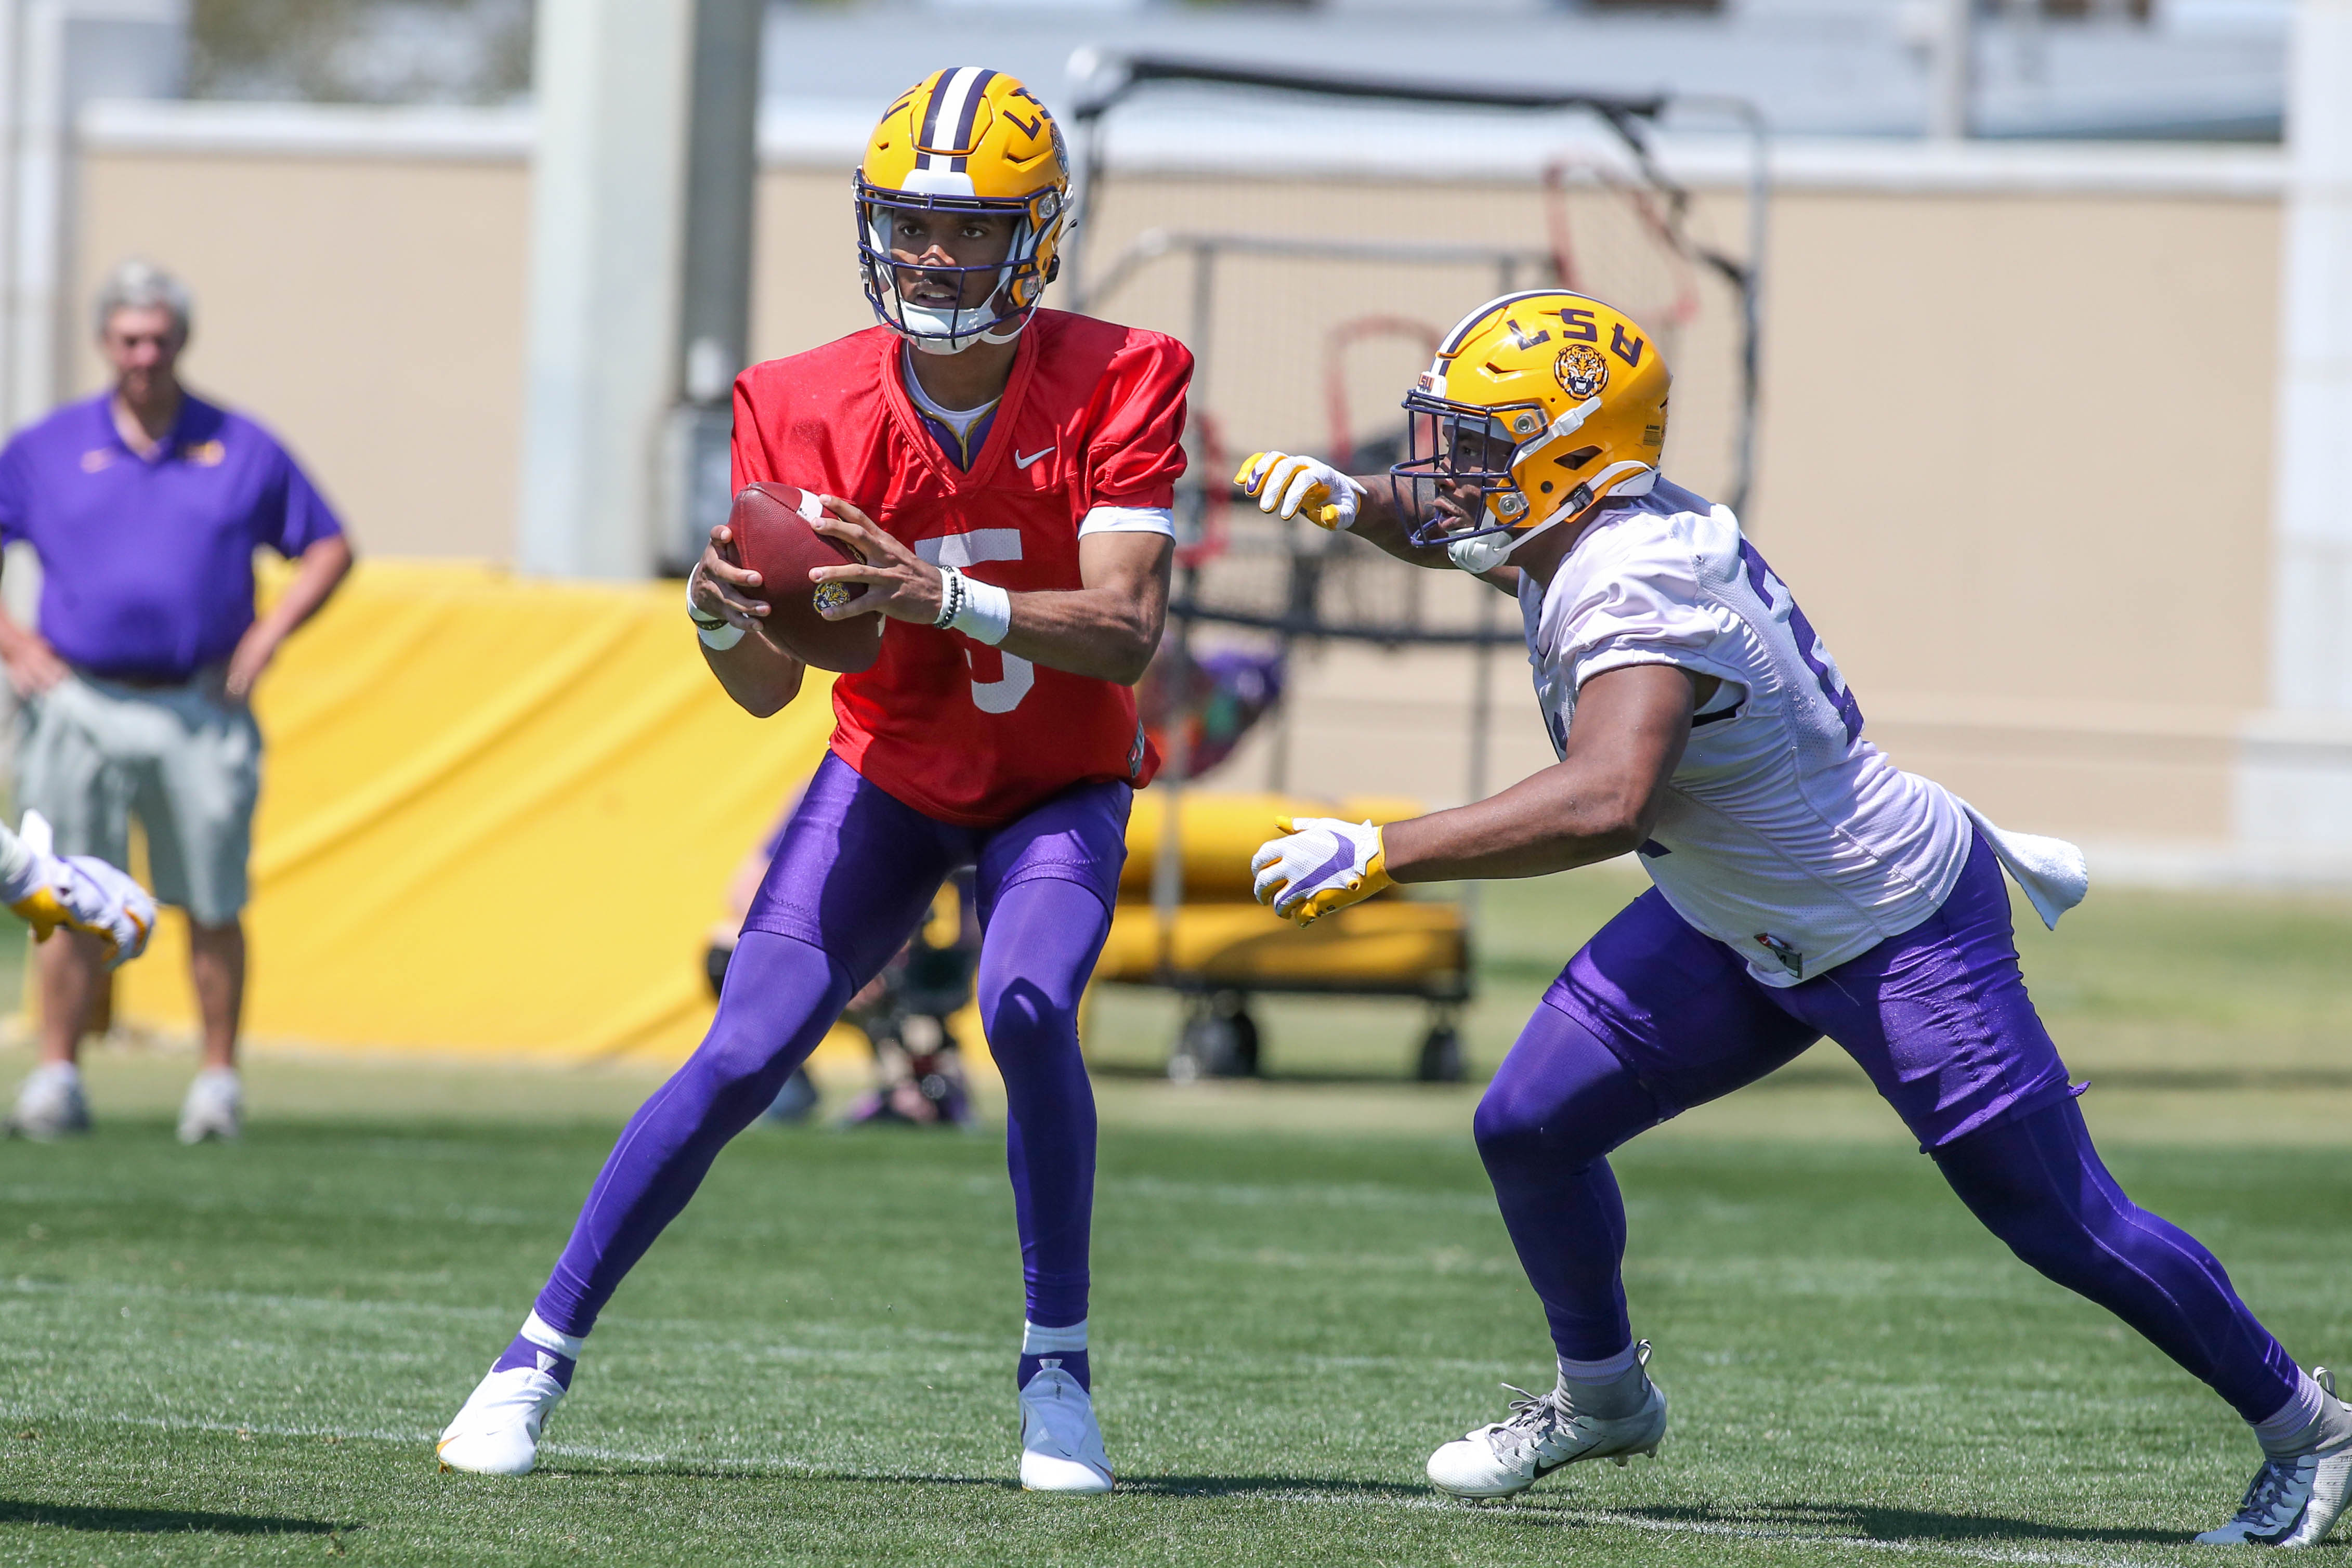 At the end of the day, LSU starting quarterback contender Jayden